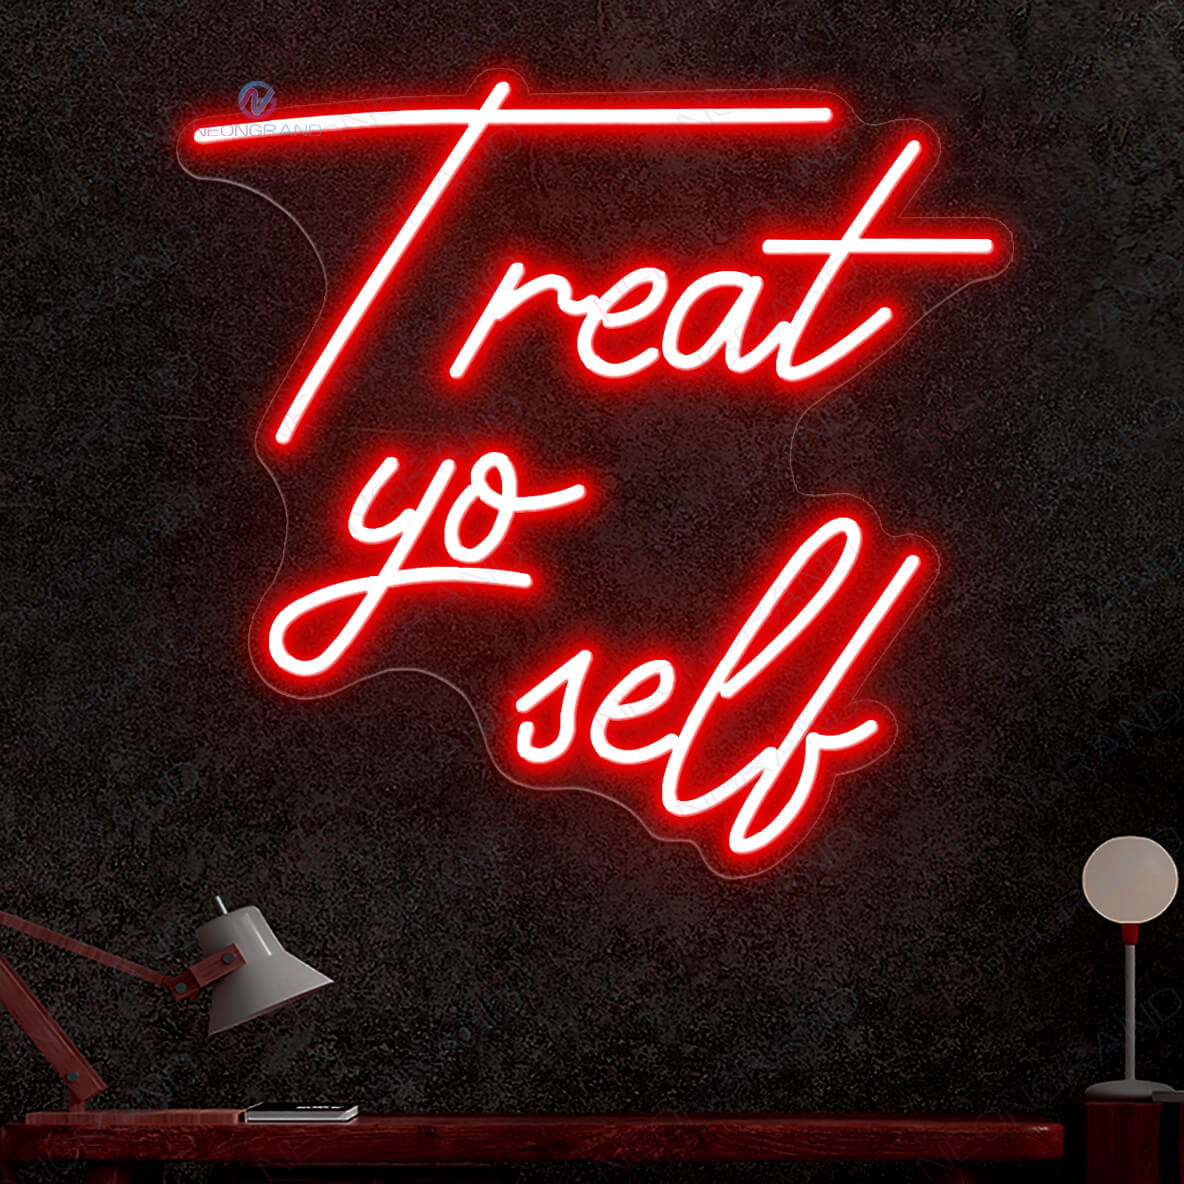 Treat Yourself Neon Sign Led Light red